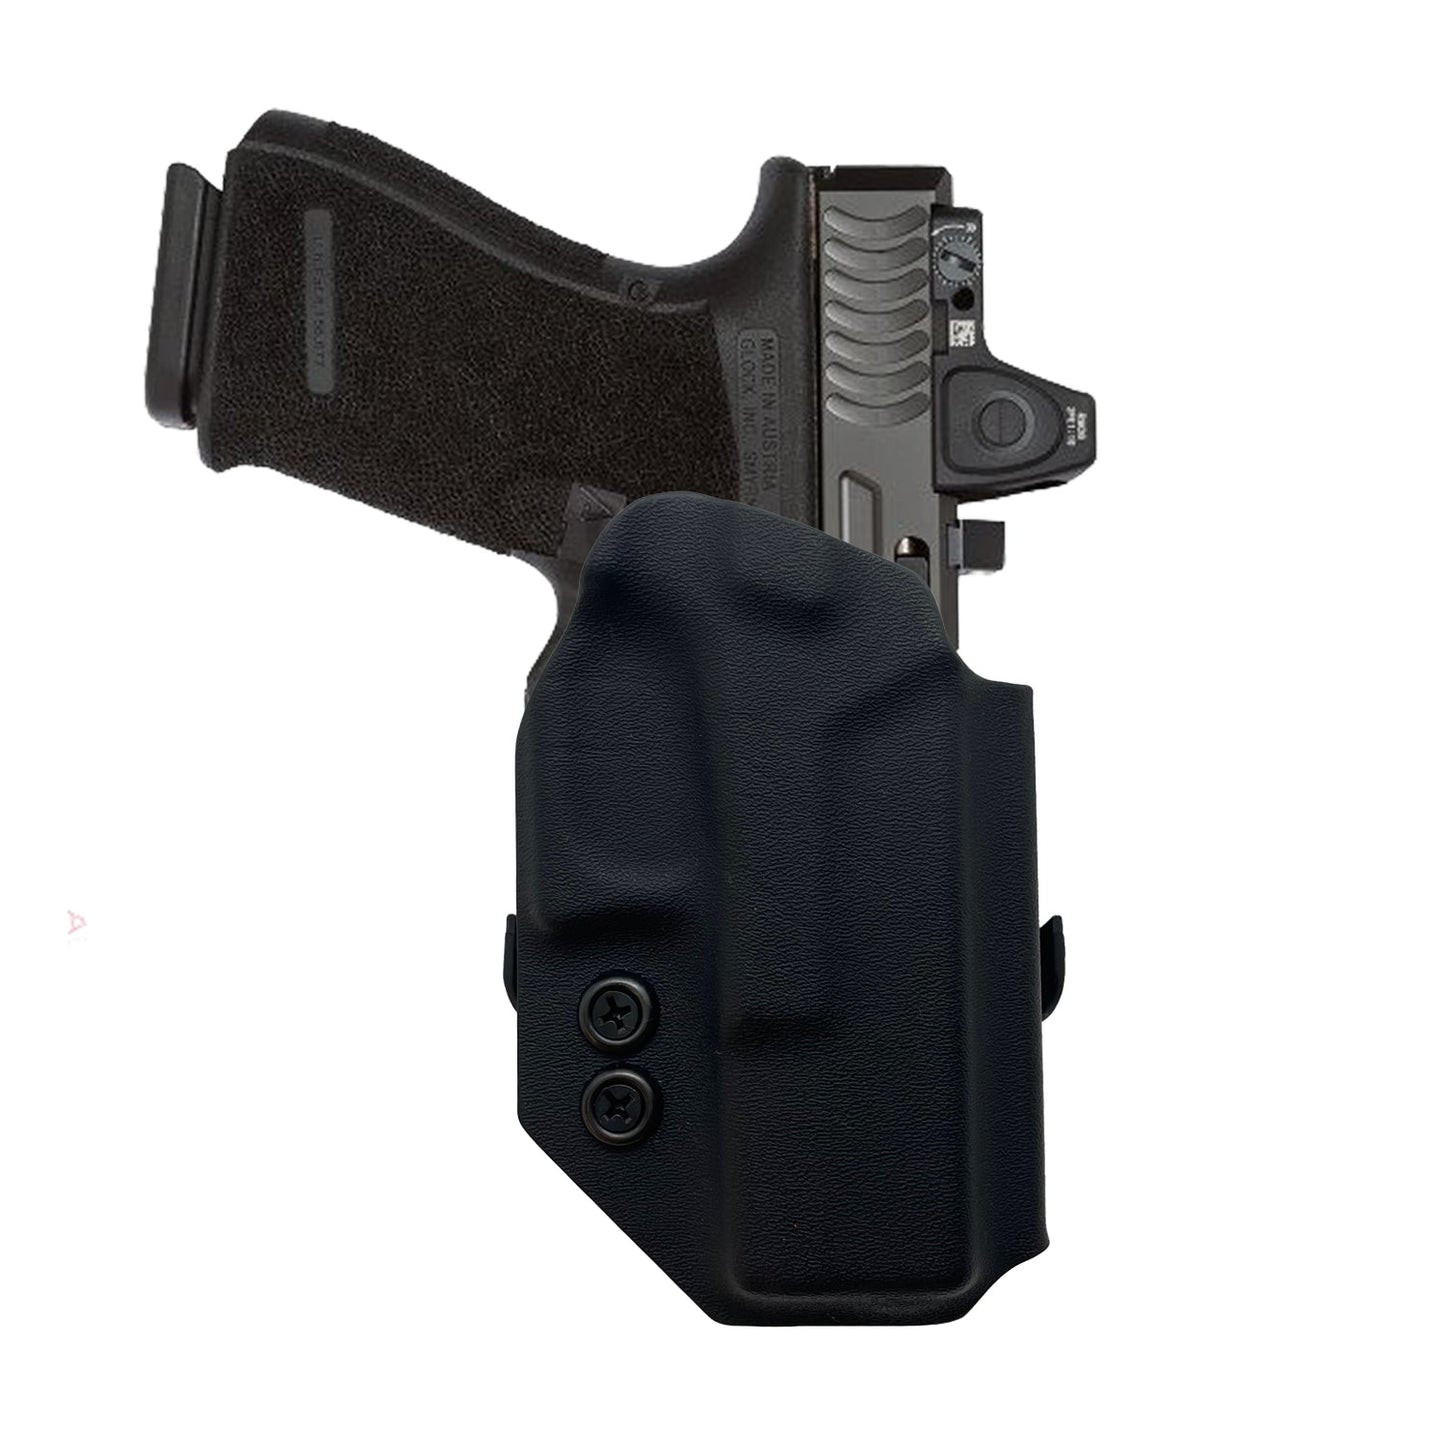 SIG P365/ P365X With LIMA Light/ Laser OWB (Outside The Waistband Holster)